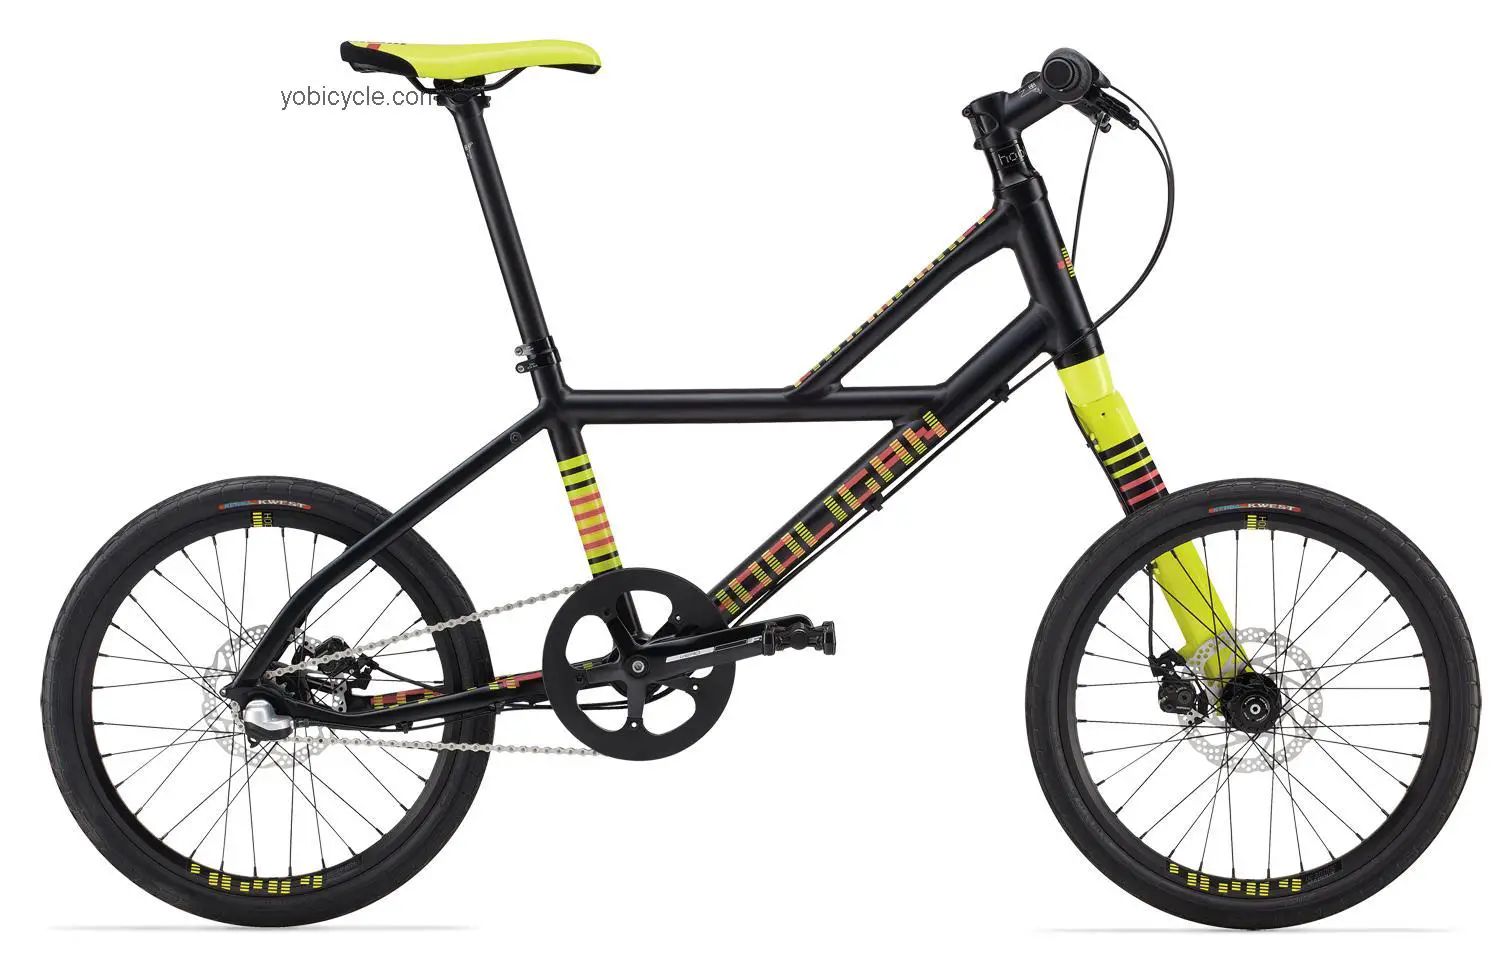 Cannondale Hooligan 1 2014 comparison online with competitors